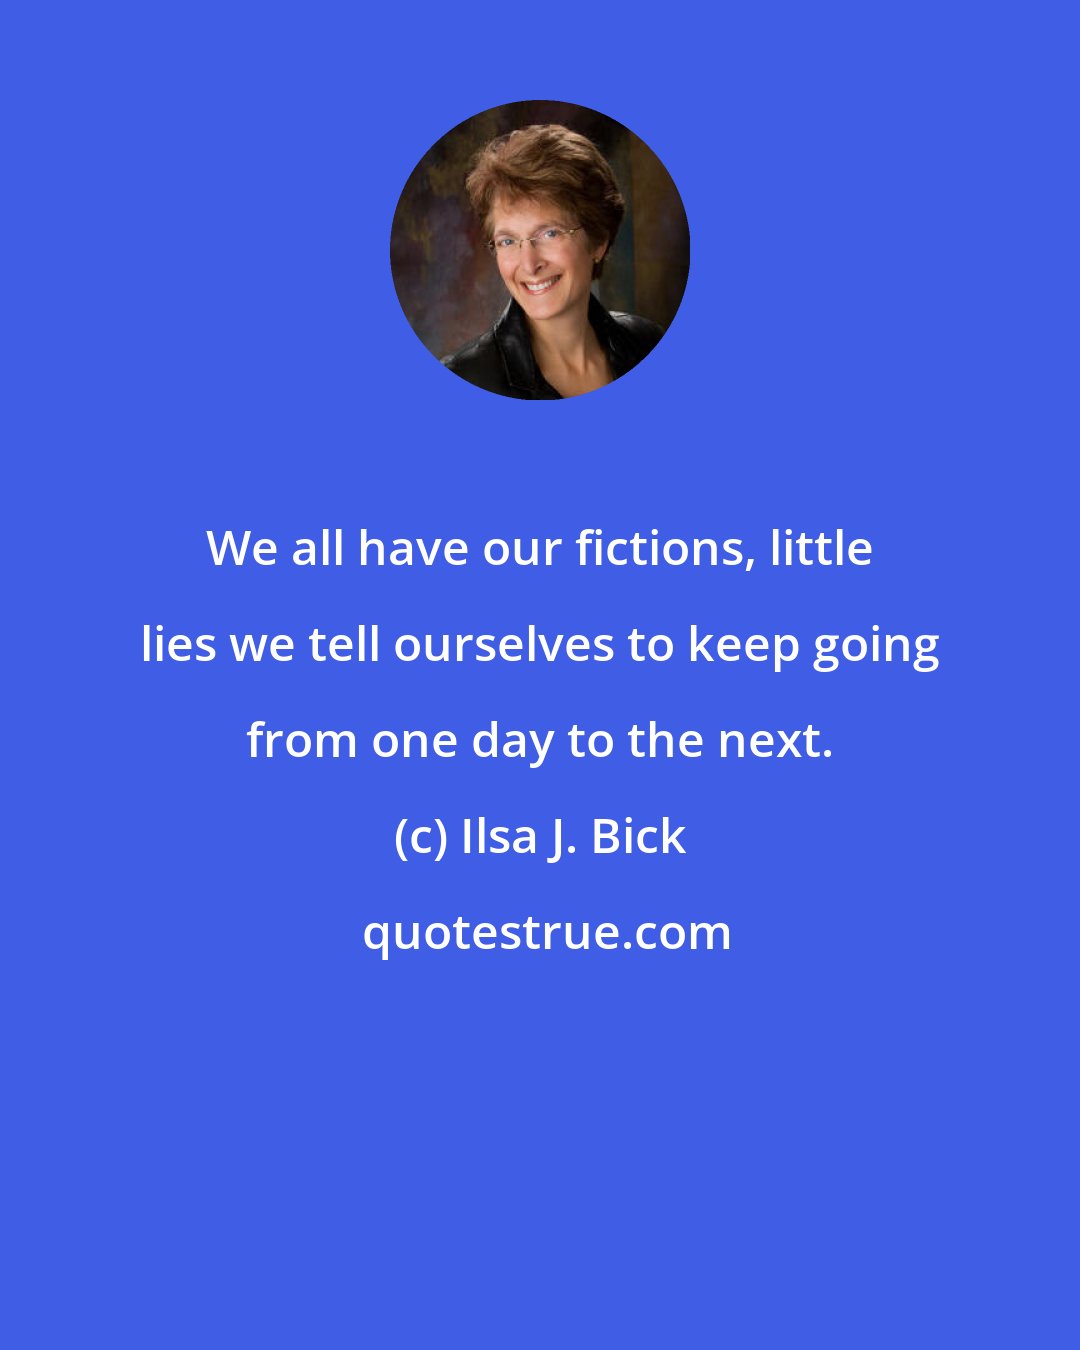 Ilsa J. Bick: We all have our fictions, little lies we tell ourselves to keep going from one day to the next.